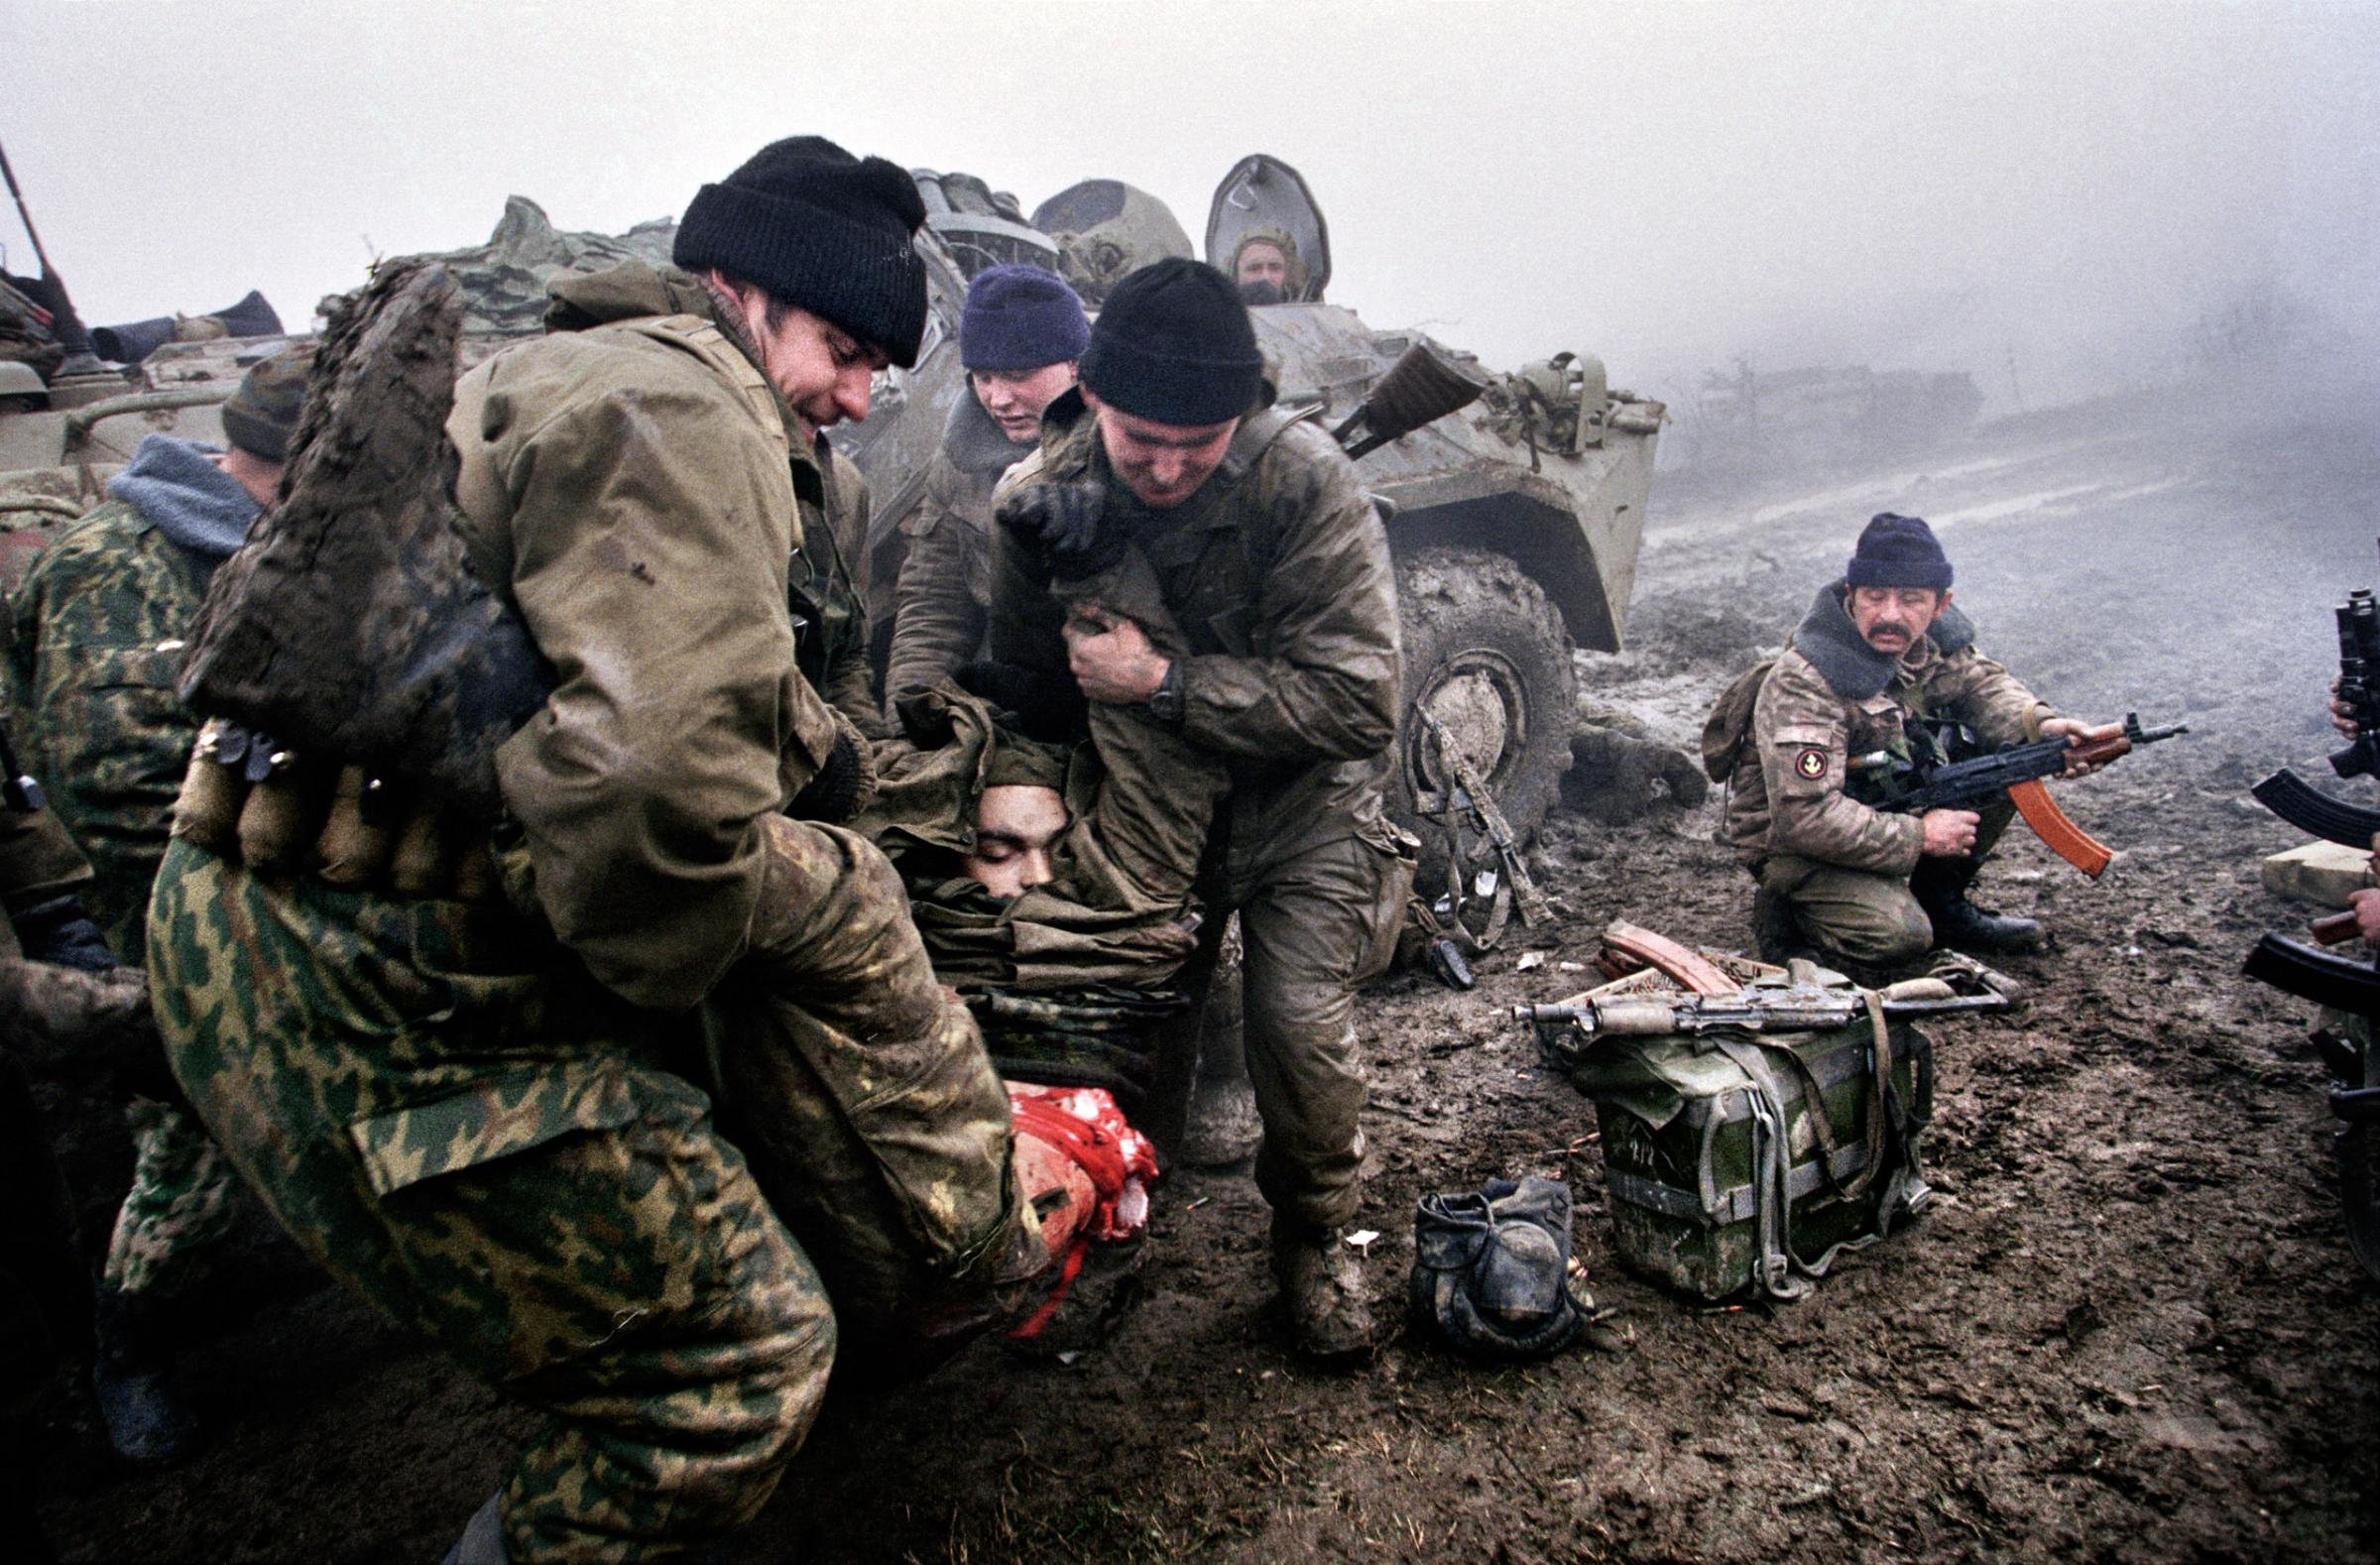 Marines carry a dead comrade during fighting in Tsentaroy , Chechnya, Dec 1999. In September of that year, Russian forces began military action against Chechen rebels. Yuri Kozyrev—NOOR